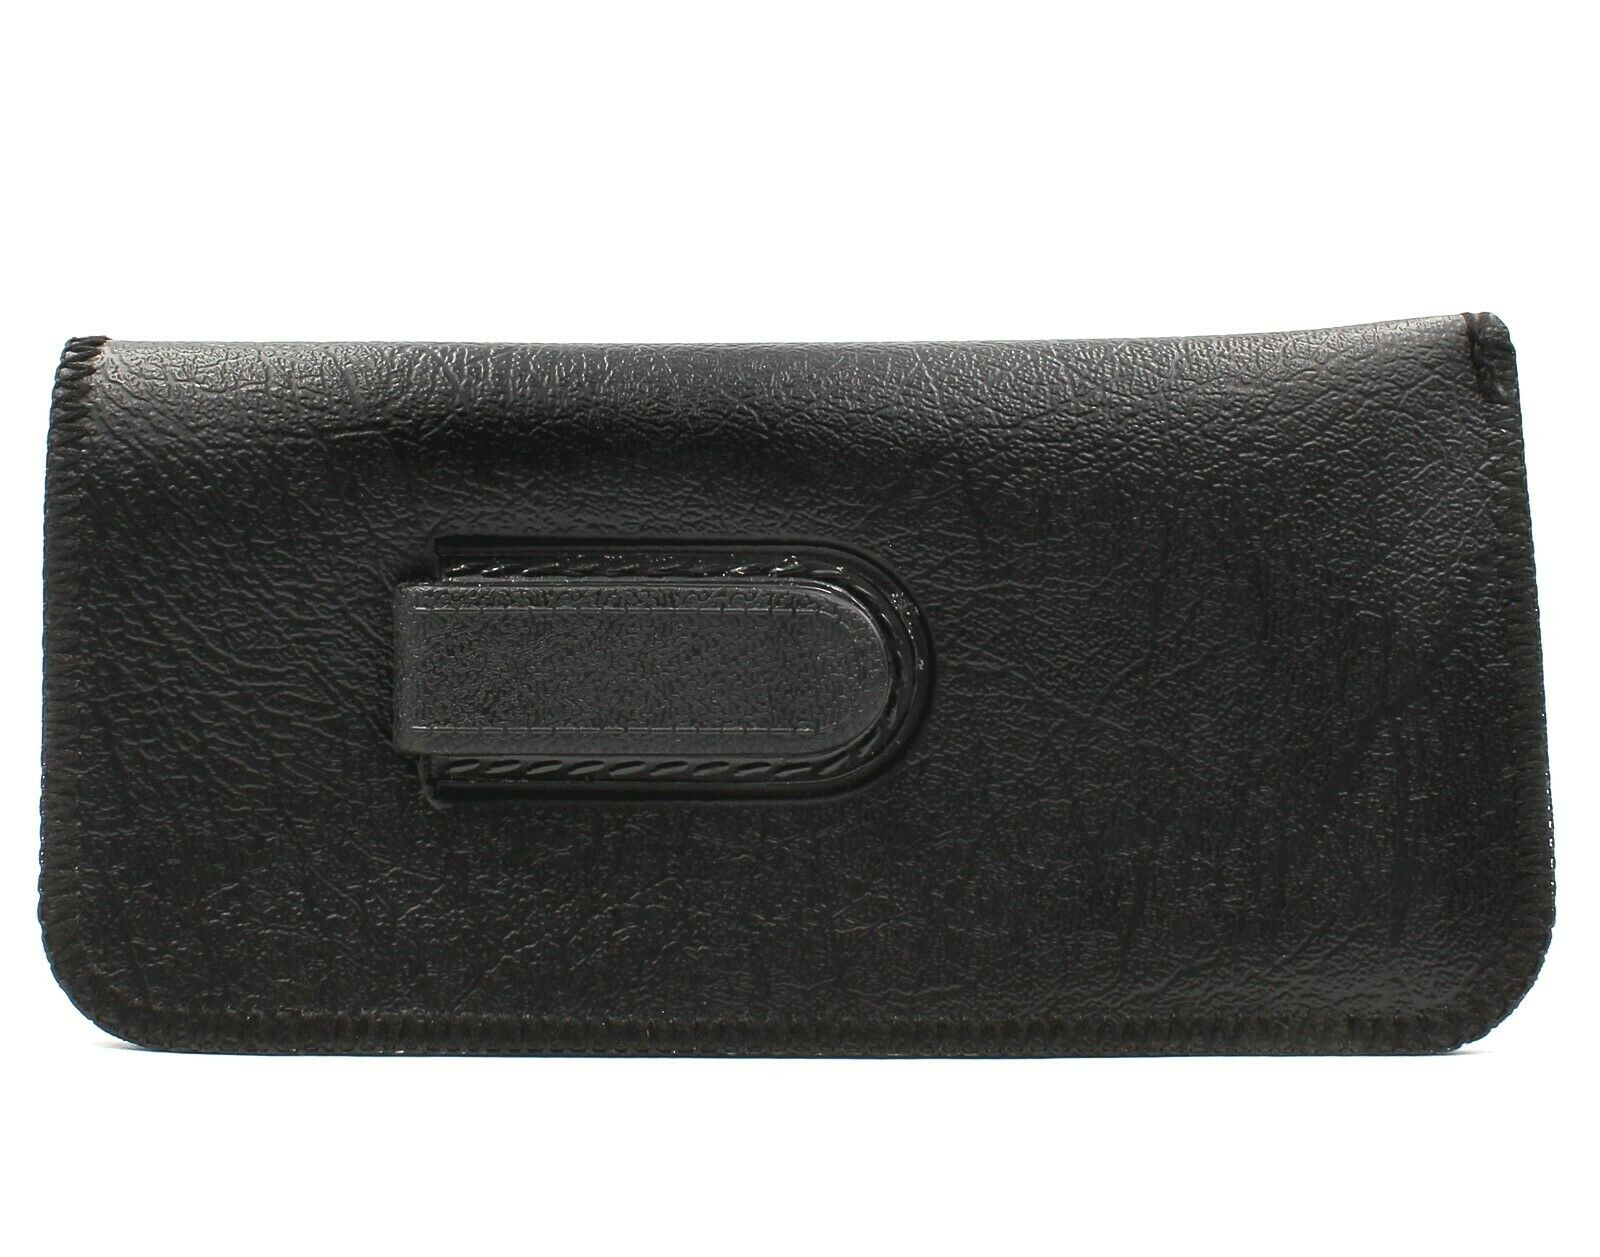 New Soft Eyeglasses Reading Glasses Case Pouch Black Faux Leather With Clip